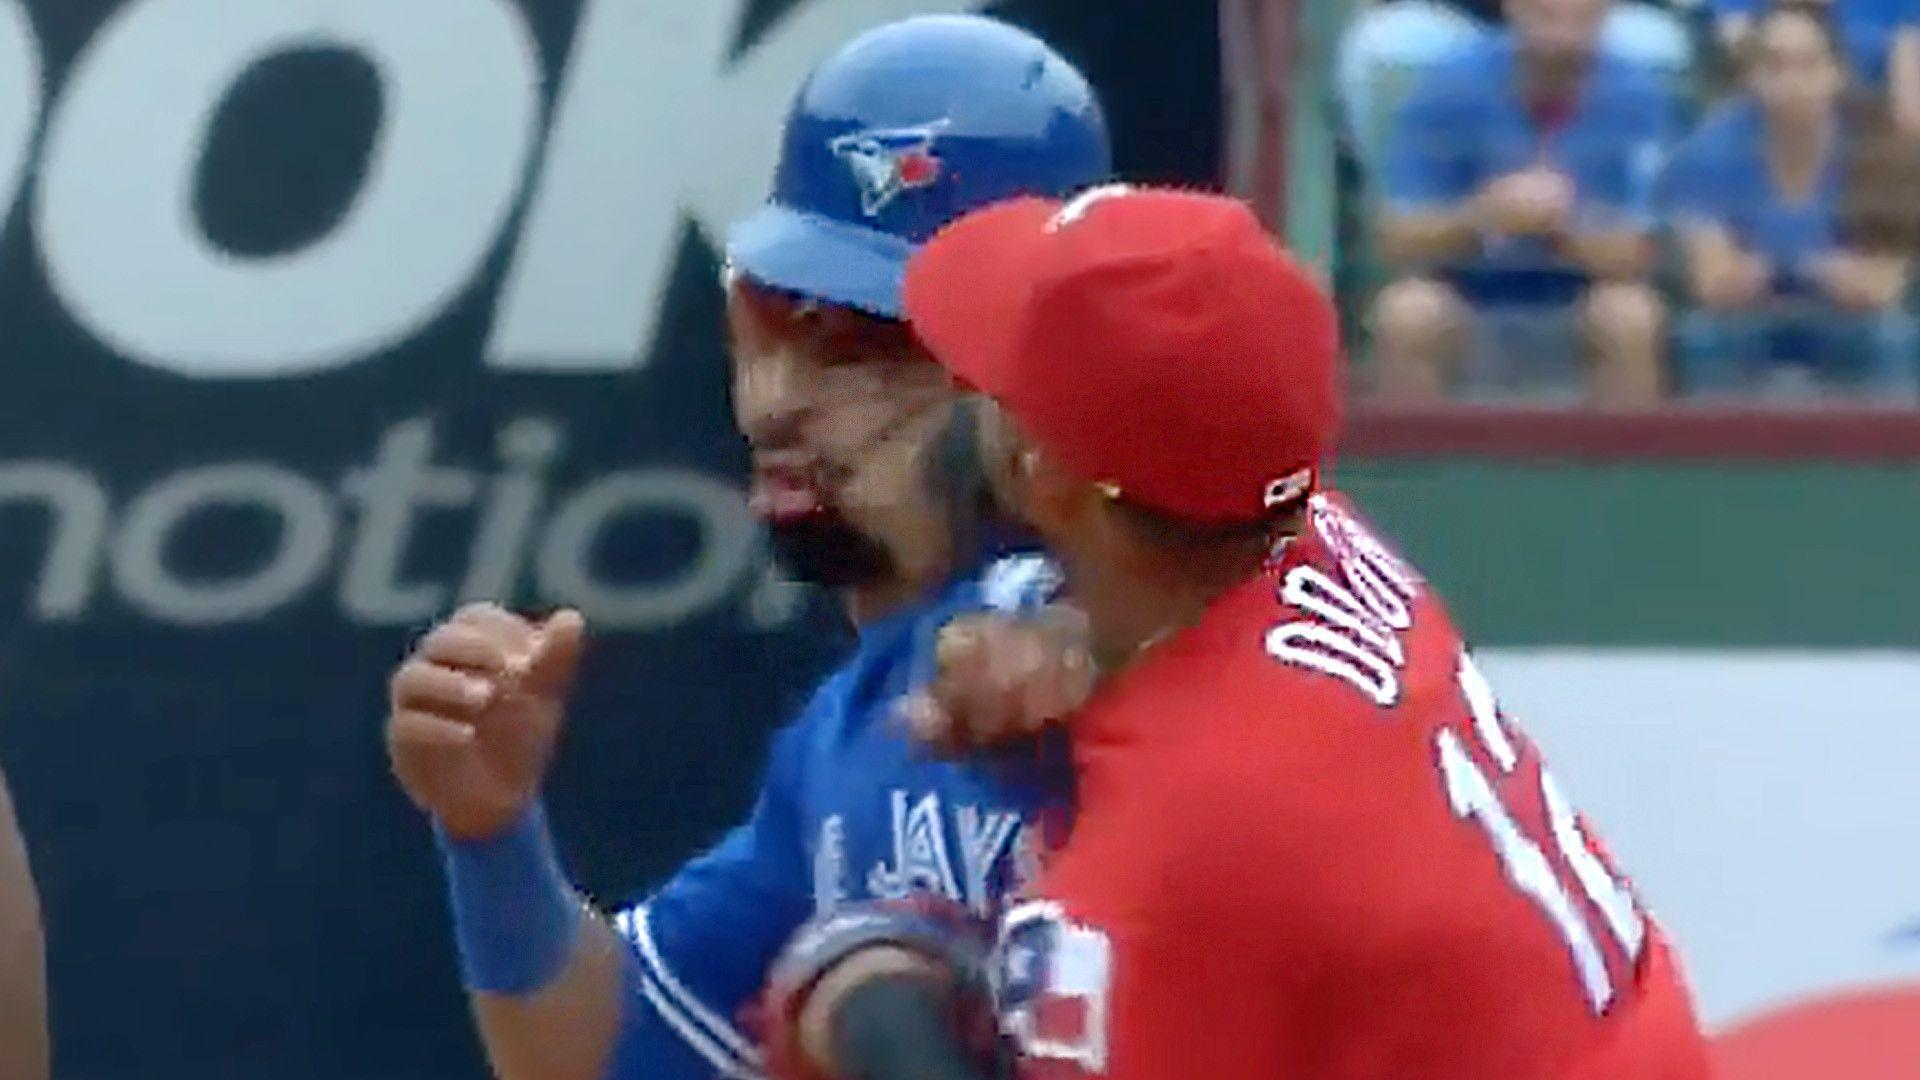 Jose Bautista gets punched in face